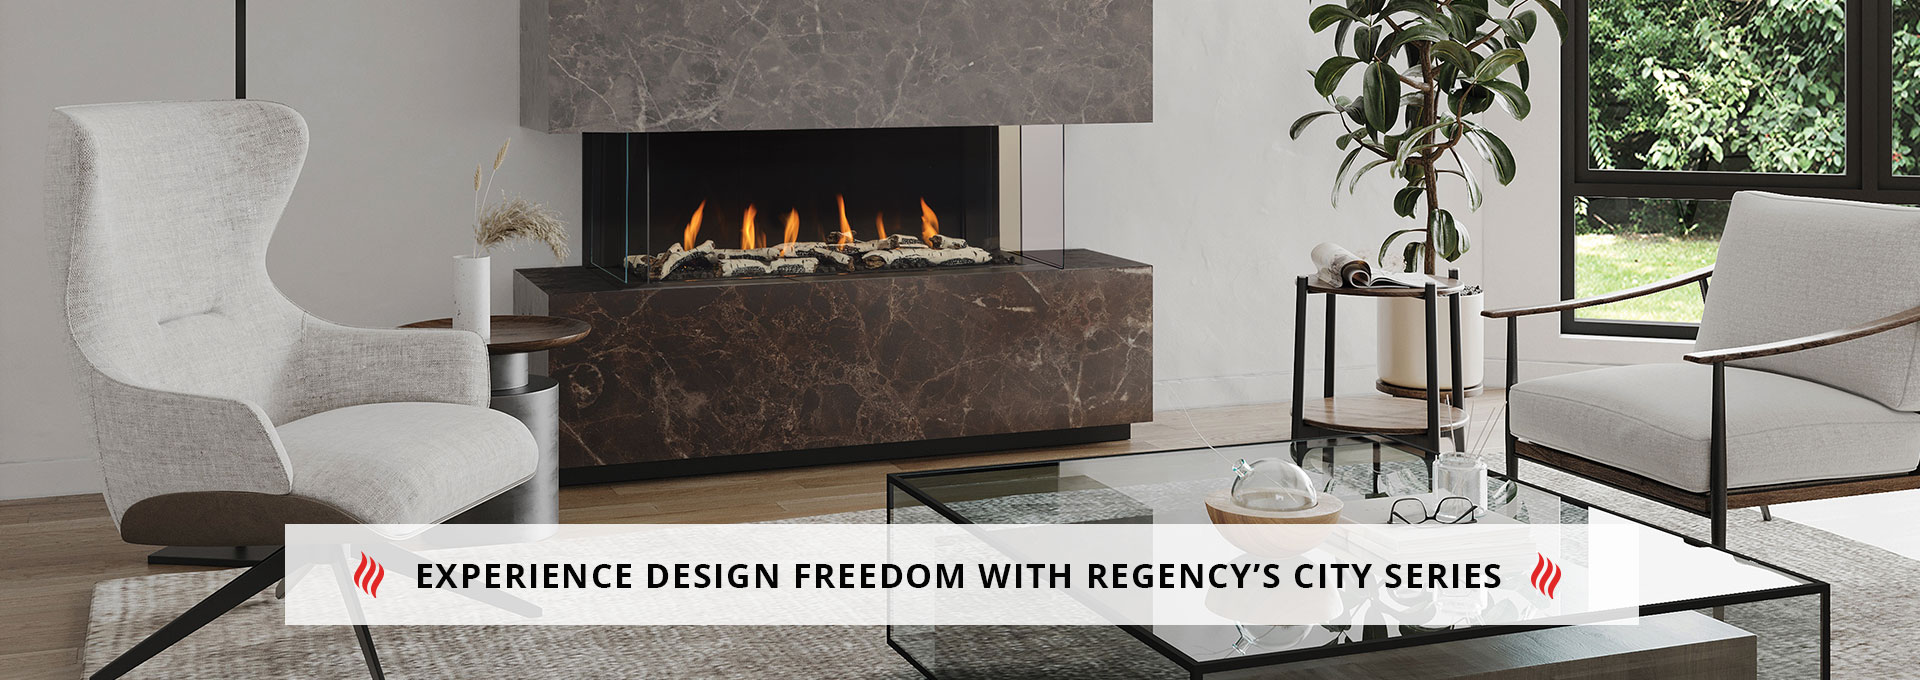 Experience Design Freedom with Regency's City Series 